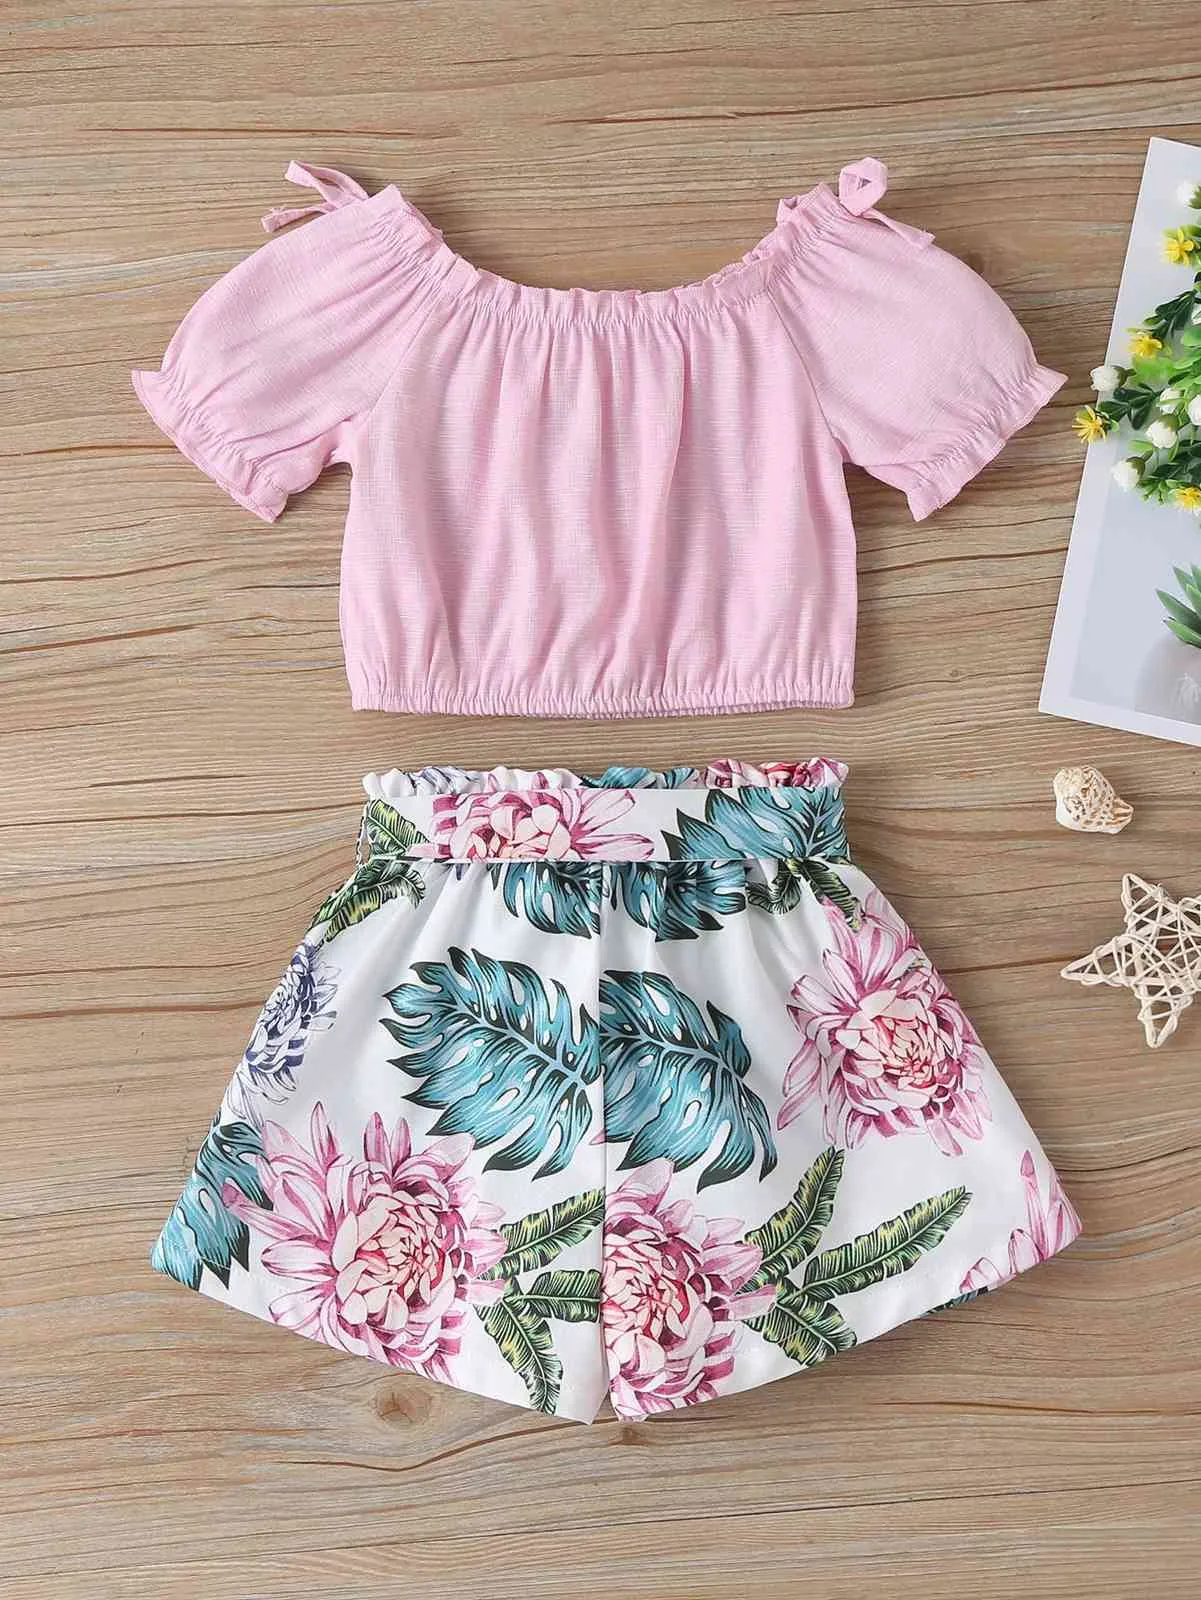 Sweet Girl Clothes Suit Spring Summer Short-sleeve Top + Printed Shorts 2-piece Fashion Thin Children's Set 2-6 Years Old 210515